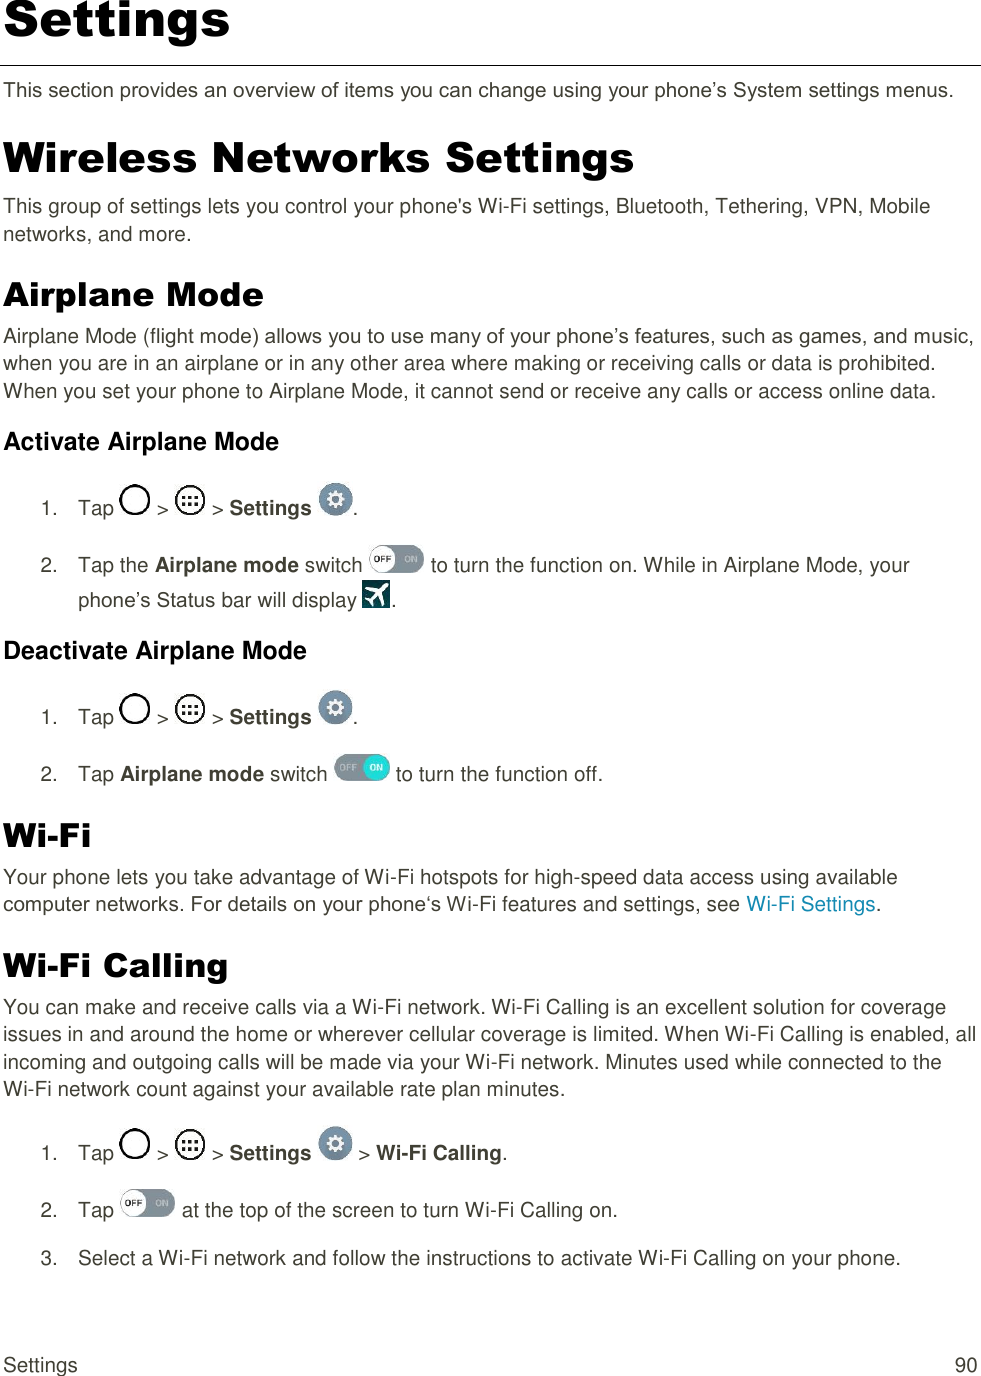 Settings  90 Settings This section provides an overview of items you can change using your phone‘s System settings menus. Wireless Networks Settings This group of settings lets you control your phone&apos;s Wi-Fi settings, Bluetooth, Tethering, VPN, Mobile networks, and more. Airplane Mode Airplane Mode (flight mode) allows you to use many of your phone‘s features, such as games, and music, when you are in an airplane or in any other area where making or receiving calls or data is prohibited. When you set your phone to Airplane Mode, it cannot send or receive any calls or access online data. Activate Airplane Mode 1.  Tap   &gt;   &gt; Settings  . 2.  Tap the Airplane mode switch   to turn the function on. While in Airplane Mode, your phone‘s Status bar will display  . Deactivate Airplane Mode 1.  Tap   &gt;   &gt; Settings  . 2.  Tap Airplane mode switch   to turn the function off. Wi-Fi Your phone lets you take advantage of Wi-Fi hotspots for high-speed data access using available computer networks. For details on your phone‗s Wi-Fi features and settings, see Wi-Fi Settings. Wi-Fi Calling You can make and receive calls via a Wi-Fi network. Wi-Fi Calling is an excellent solution for coverage issues in and around the home or wherever cellular coverage is limited. When Wi-Fi Calling is enabled, all incoming and outgoing calls will be made via your Wi-Fi network. Minutes used while connected to the Wi-Fi network count against your available rate plan minutes. 1.  Tap   &gt;   &gt; Settings   &gt; Wi-Fi Calling. 2.  Tap   at the top of the screen to turn Wi-Fi Calling on. 3.  Select a Wi-Fi network and follow the instructions to activate Wi-Fi Calling on your phone. 